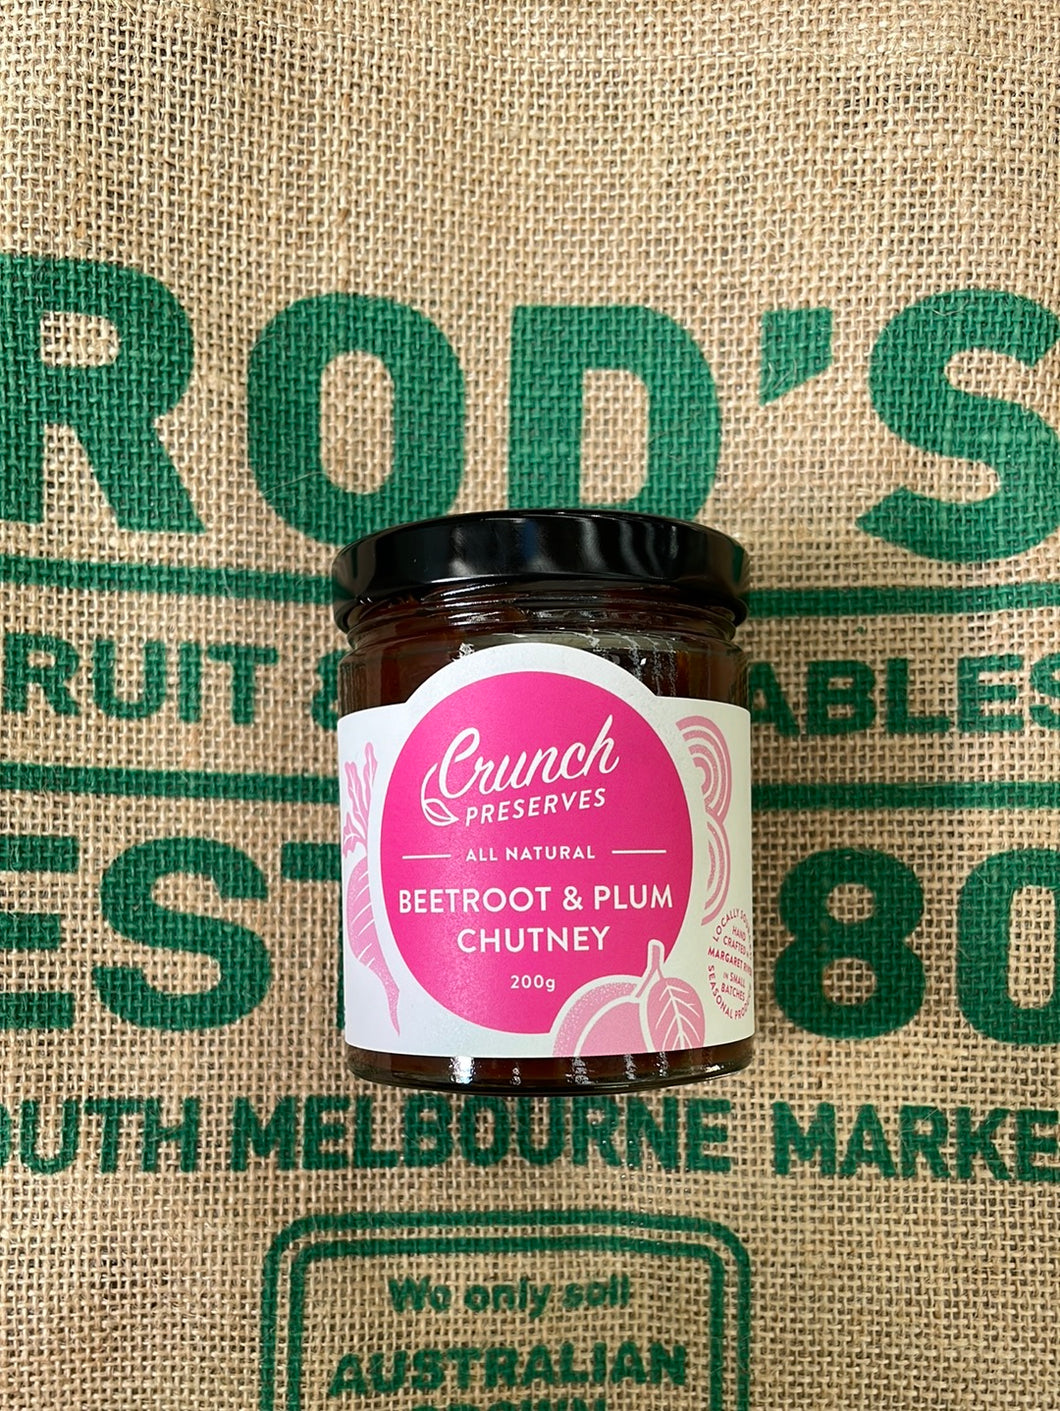 Chutney-Beetroot and plum 200g  LOCALLY  MADE